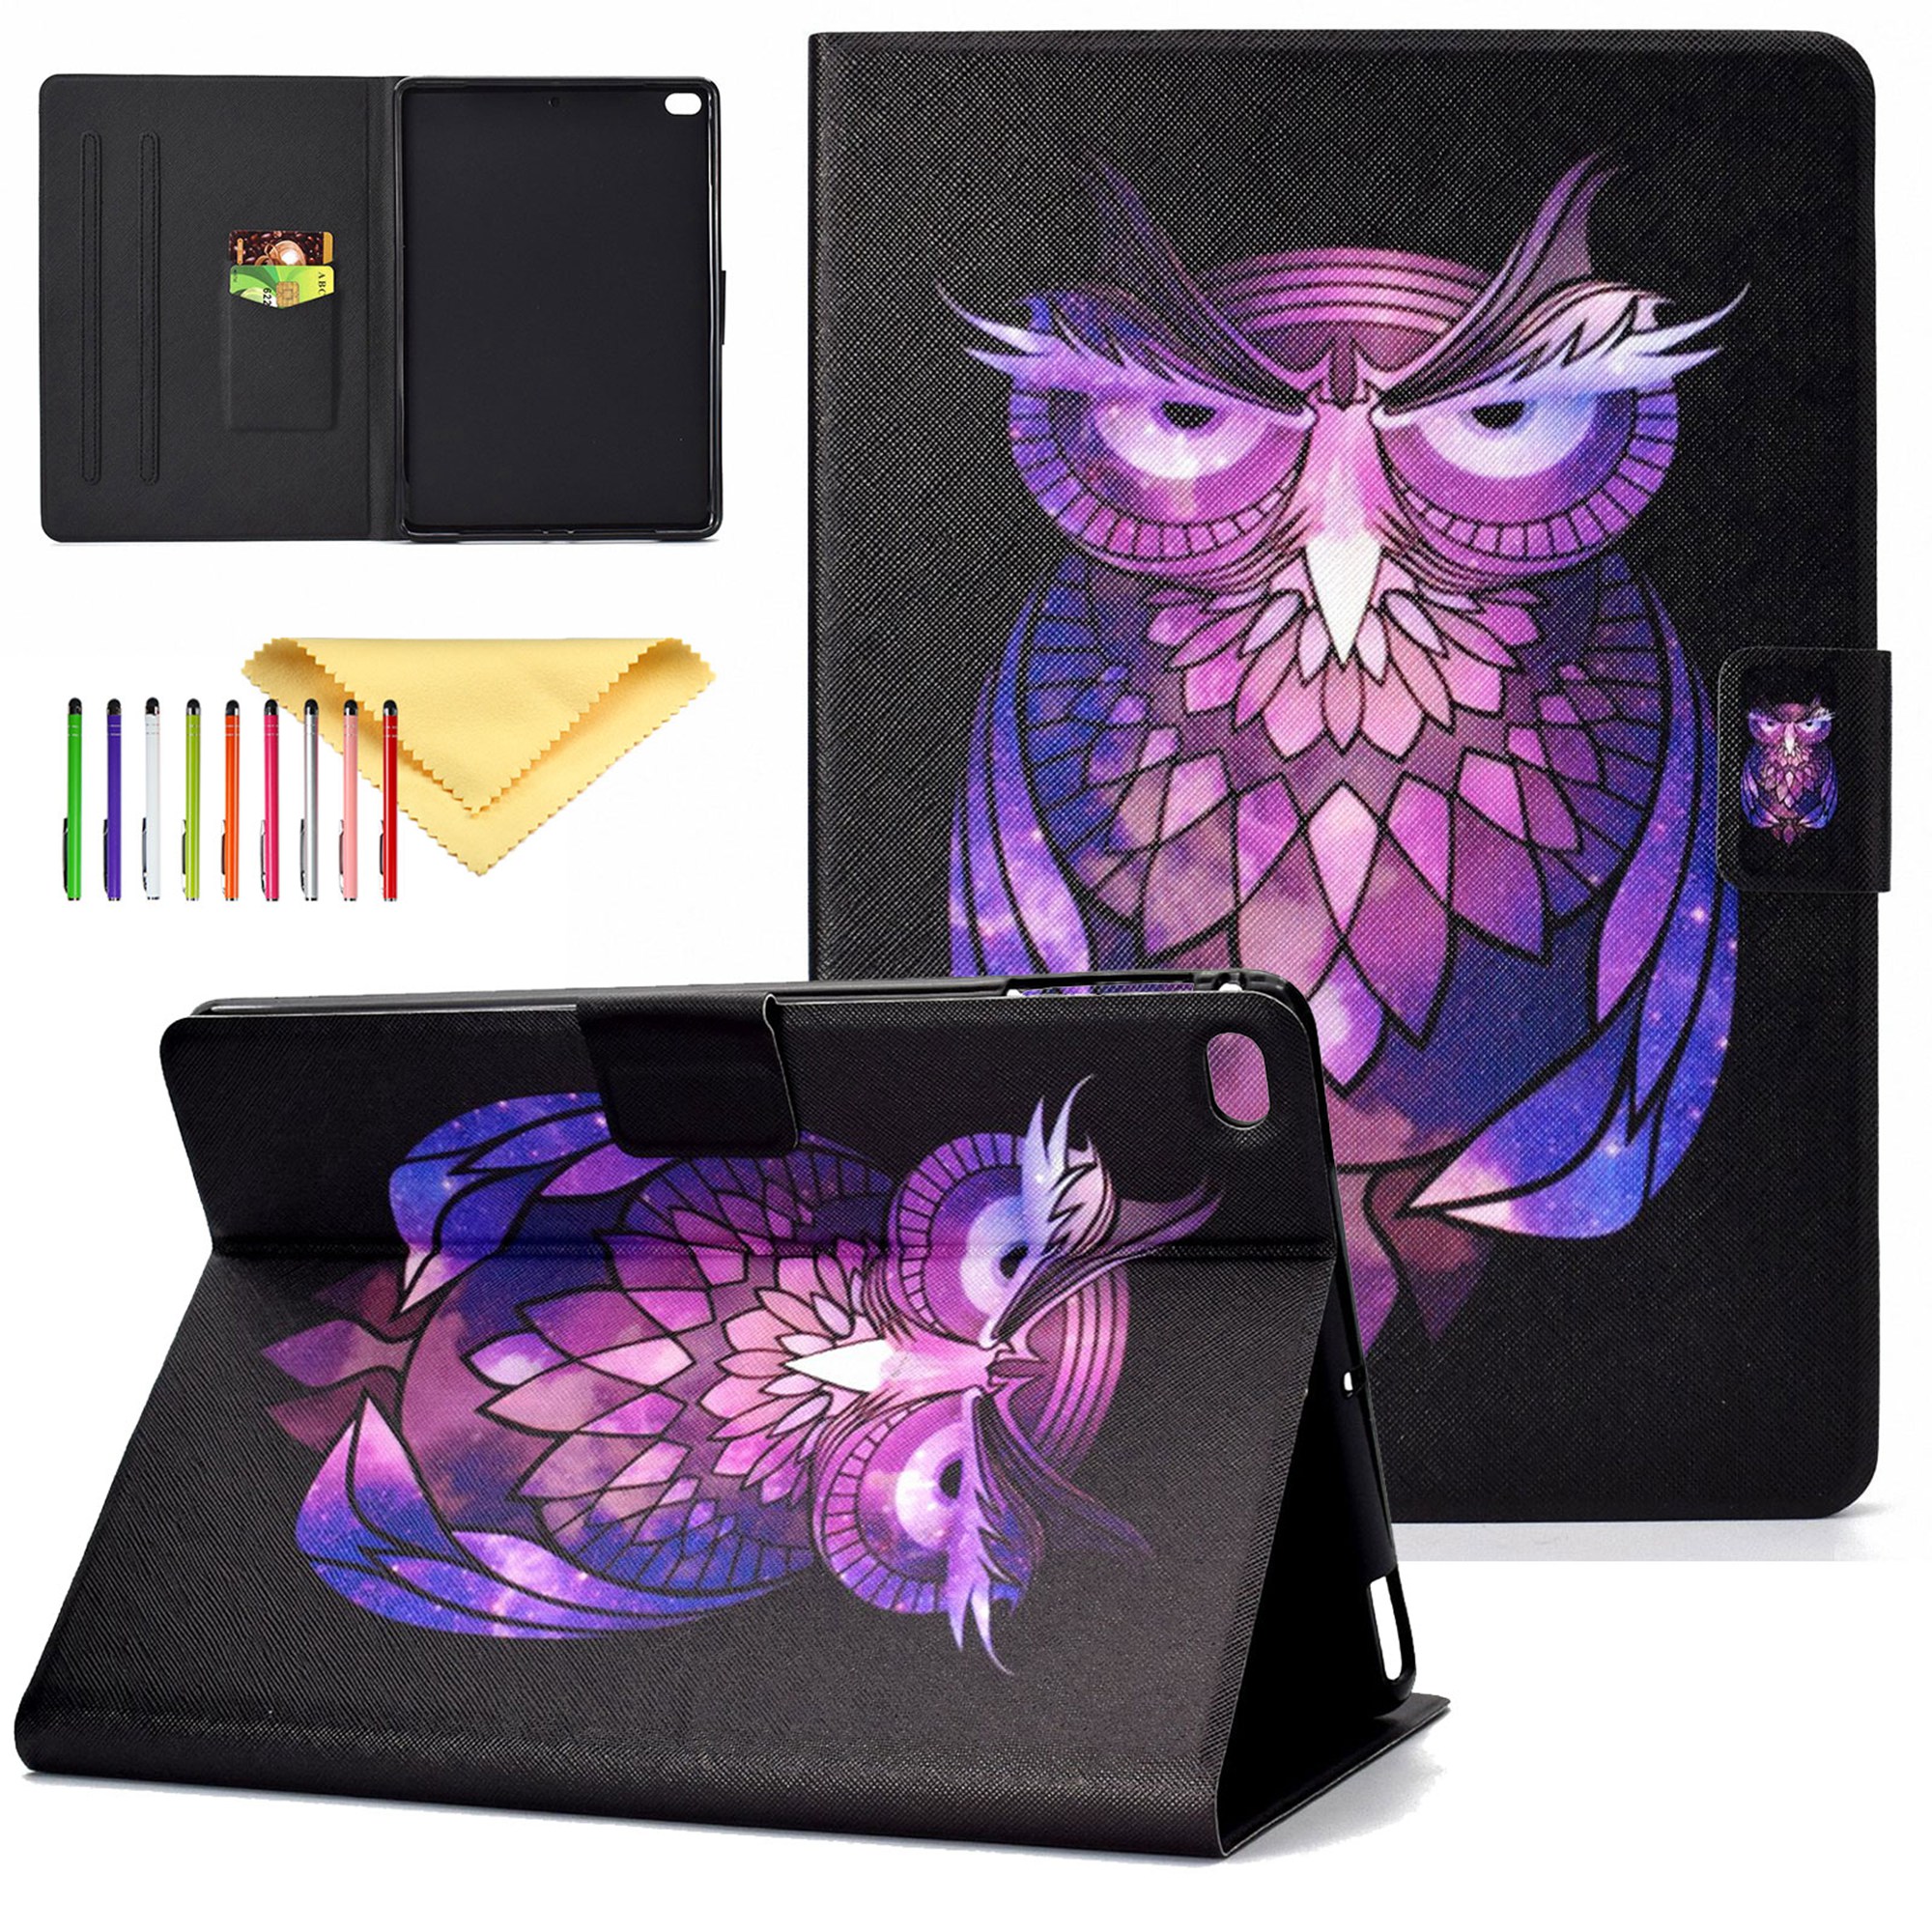 iPad 9.7 inch 2018 2017 Case/iPad Air Case/iPad Air 2 Case/iPad Pro 9.7 Case, Dteck PU Leather Folio Smart Cover with Auto Sleep Wake Stand Wallet Case For iPad 9.7" (Not fit iPad 2 3 4),Purple Owl - image 1 of 5